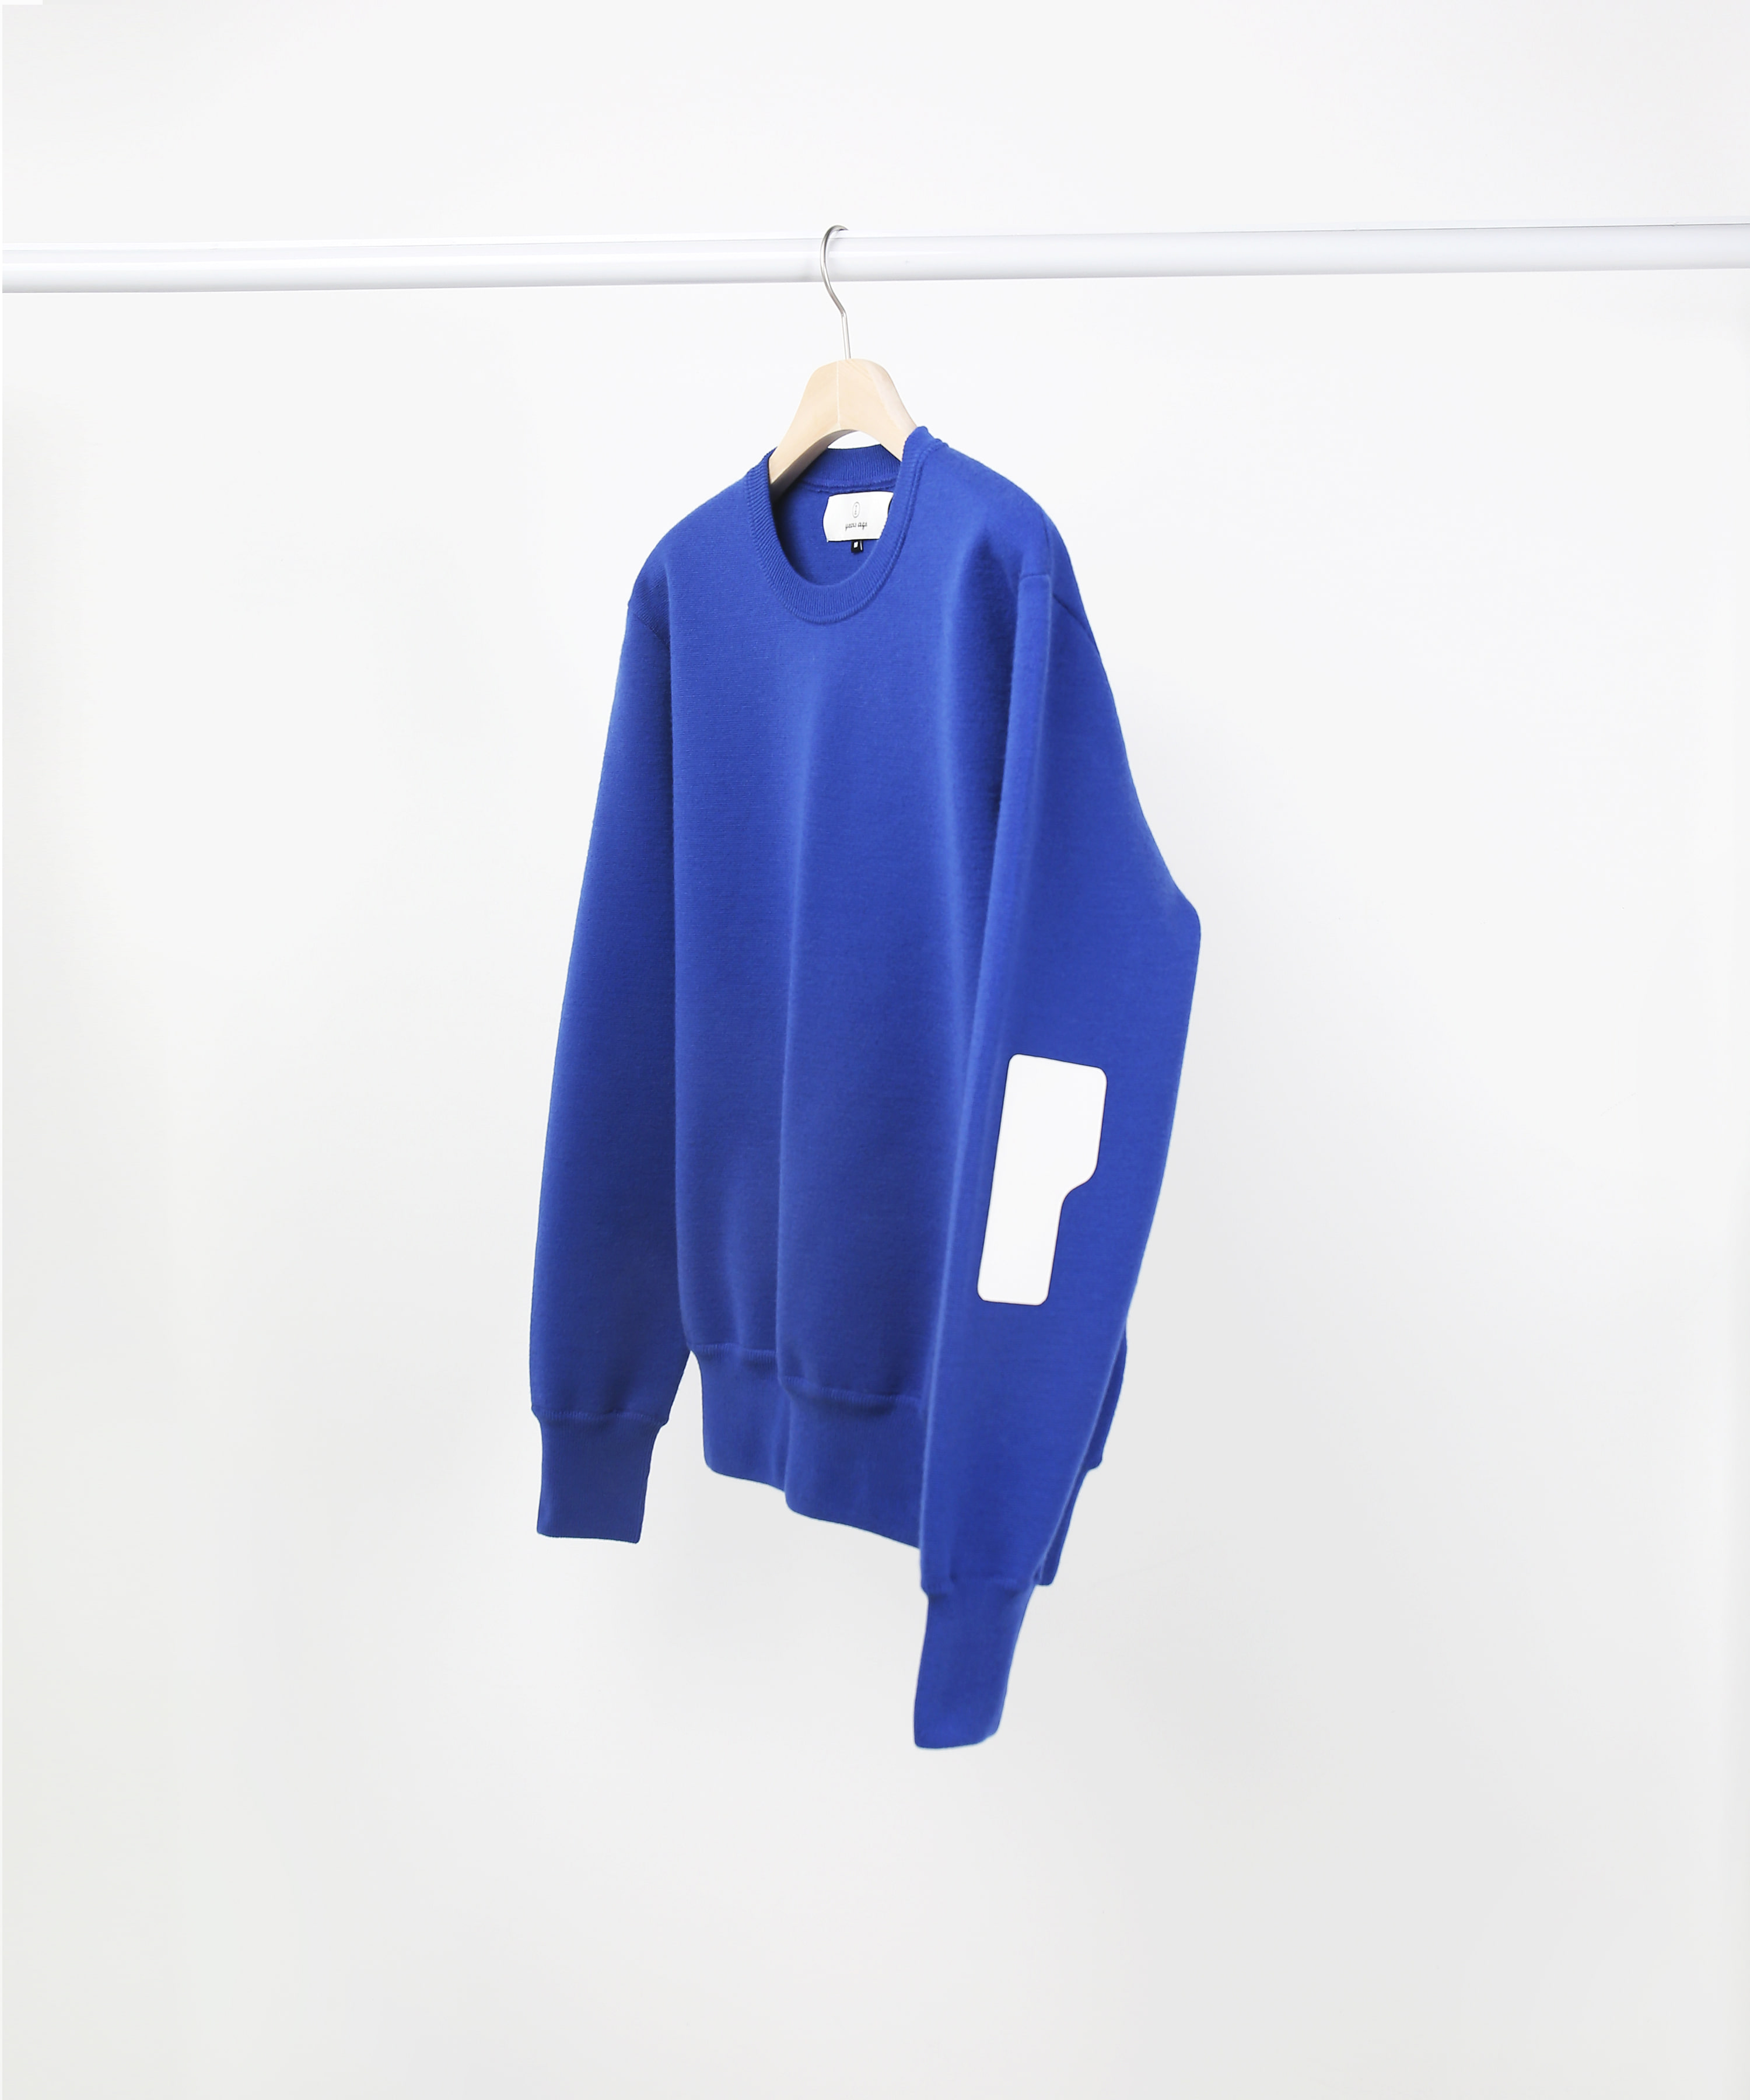 BLUE ROVER WOOL KNIT SWEATER